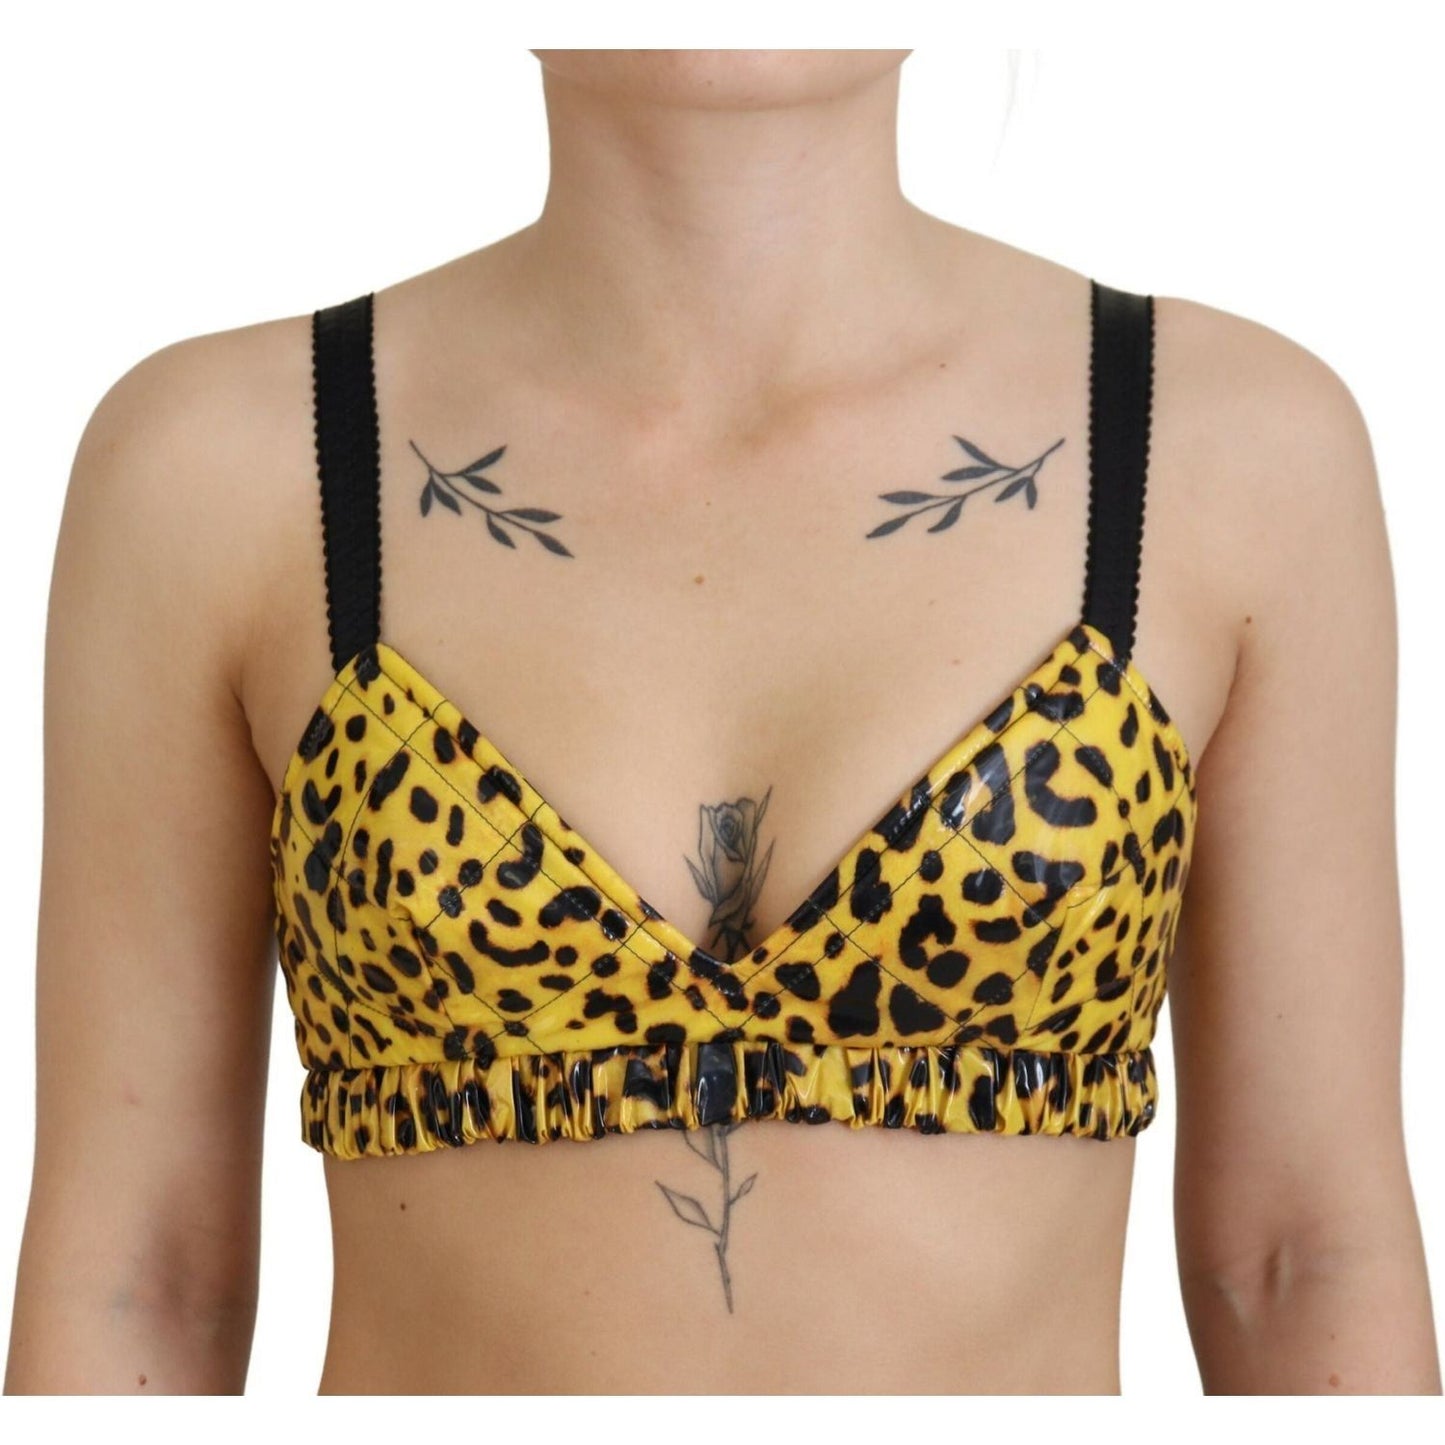 Dolce & Gabbana Chic Leopard Print Sleeveless Corset Top yellow-leopard-cropped-bustier-corset-bra-top IMG_0661-scaled-fcfb58c4-bc6.jpg